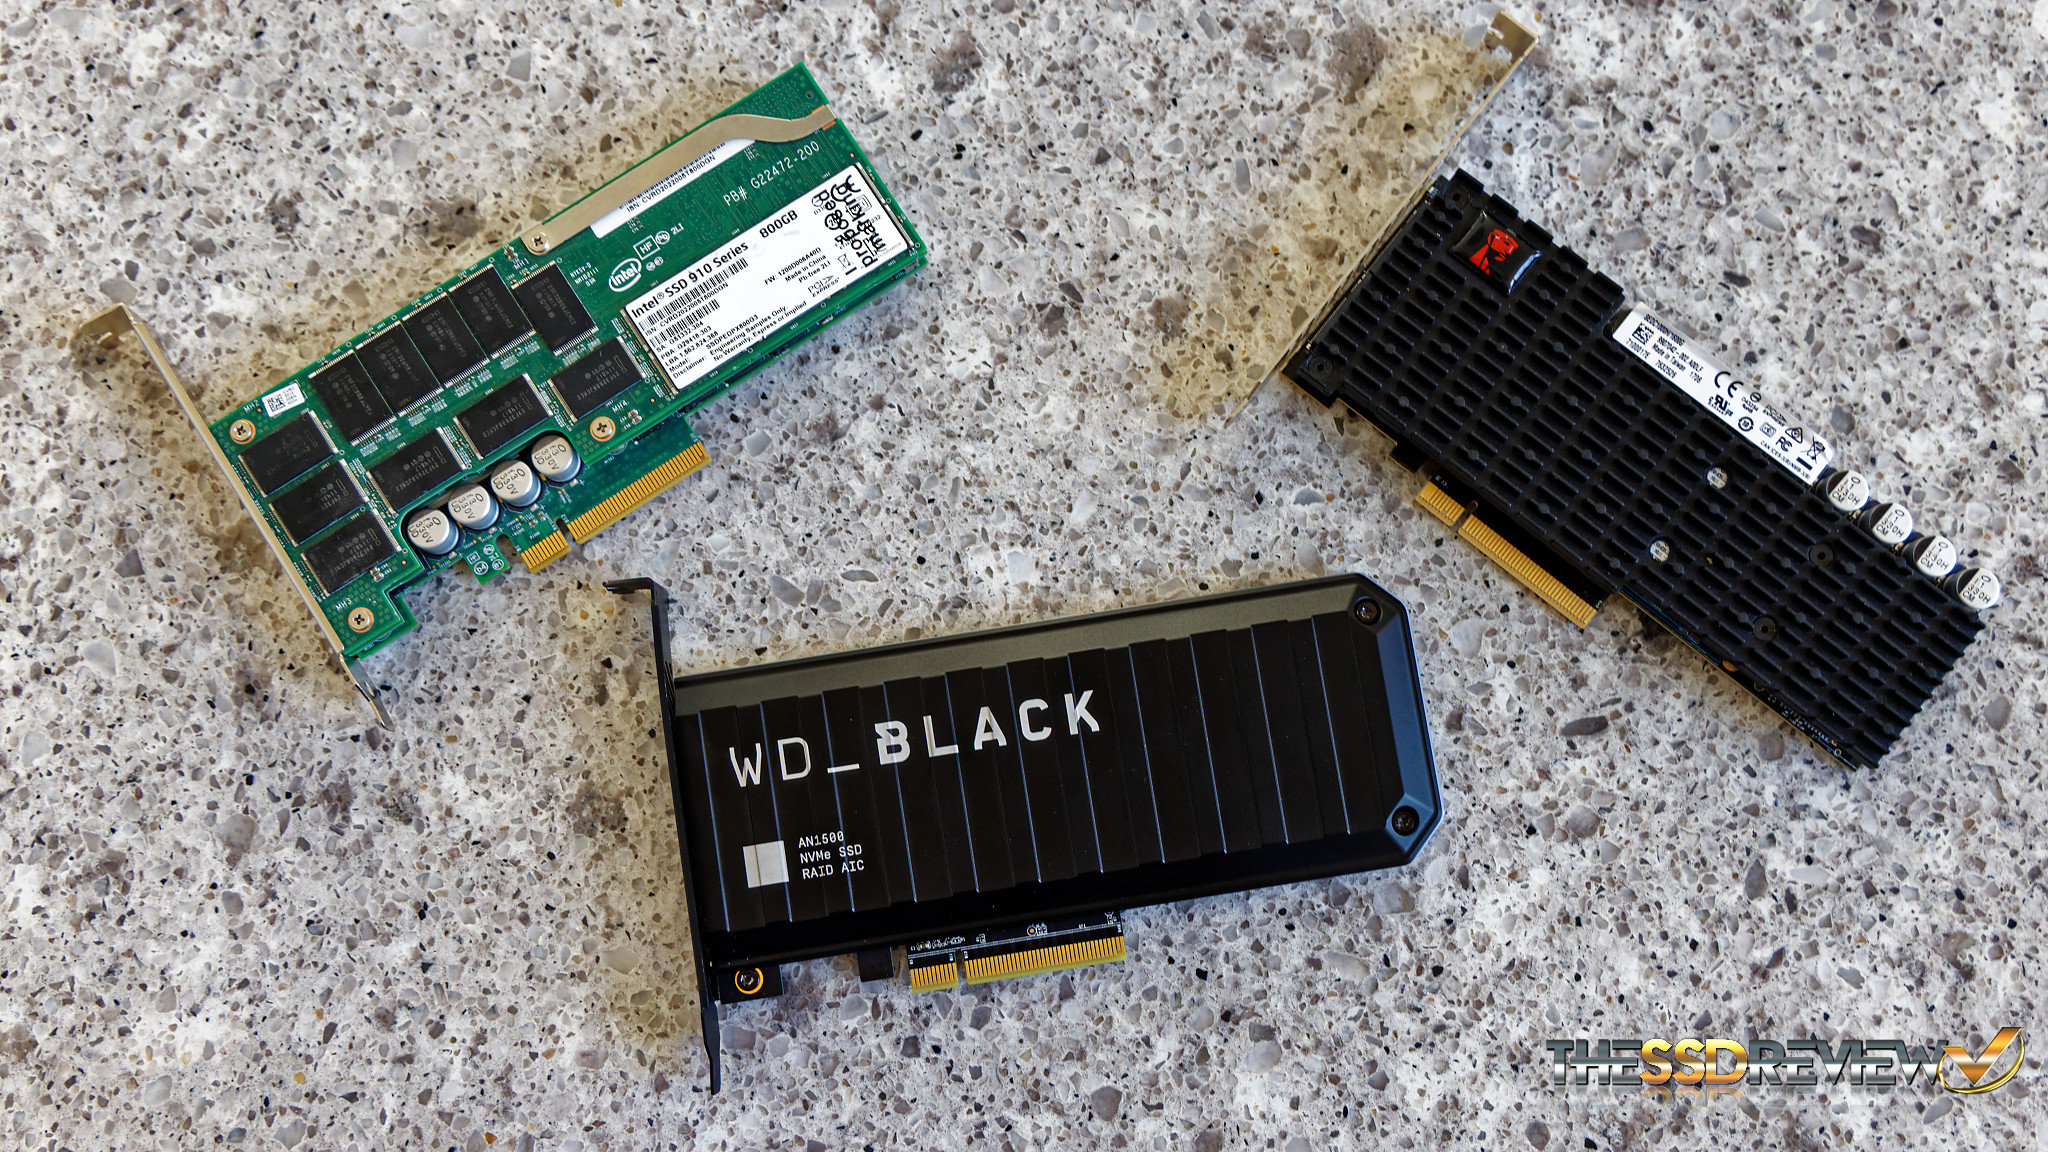 WD AN1500 2TB RGB NVMe SSD RAID Card Review - 6.5GB/s, 5-Year Warranty and It Boots! | The SSD Review